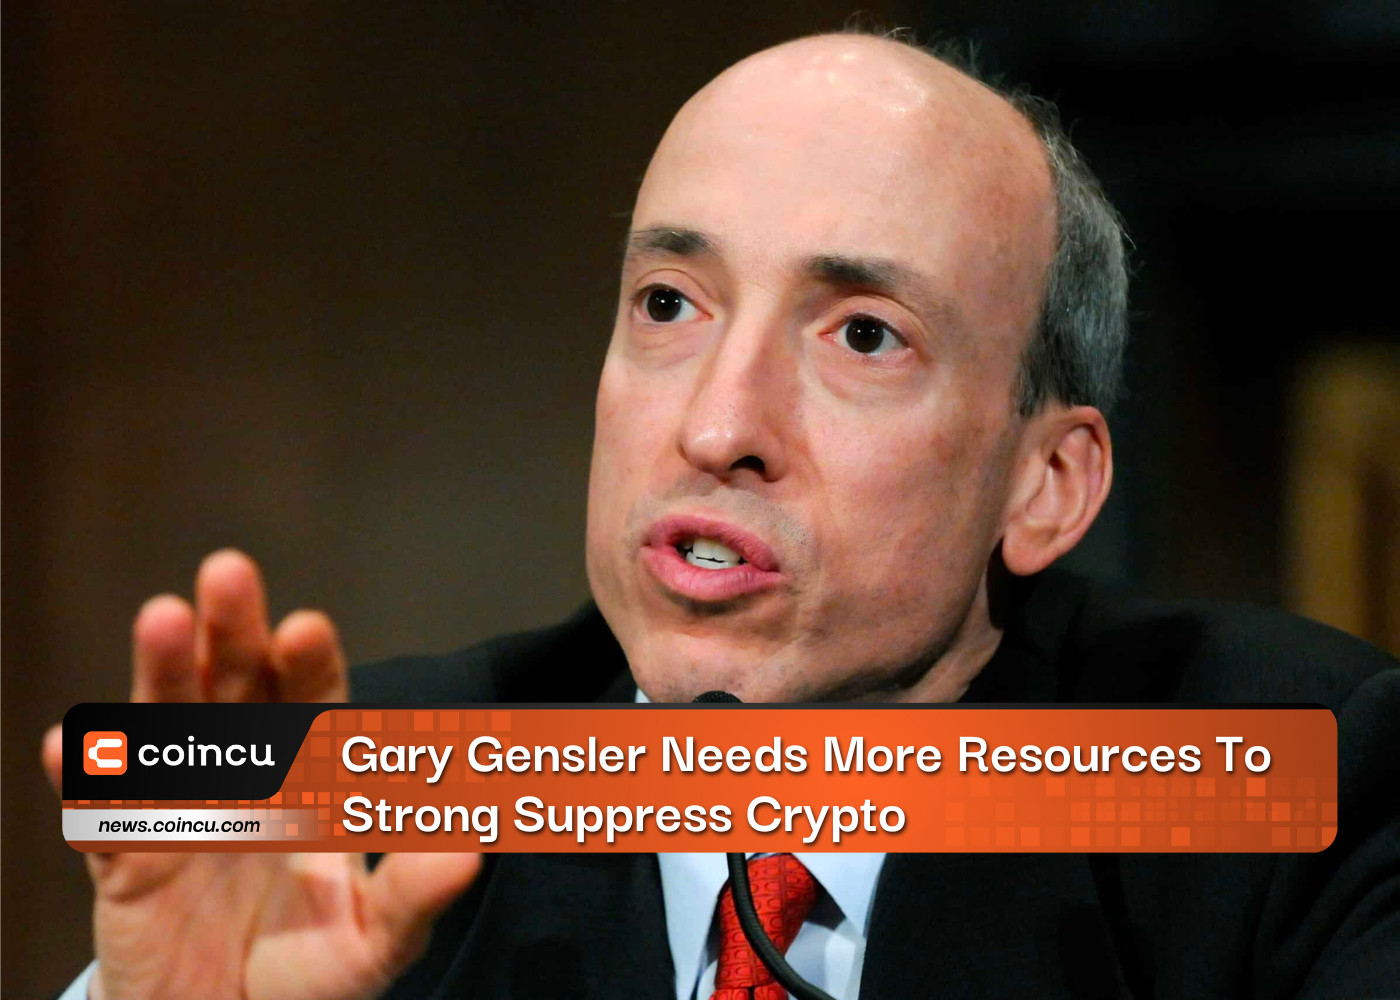 Gary Gensler Needs More Resources To Strong Suppress Crypto